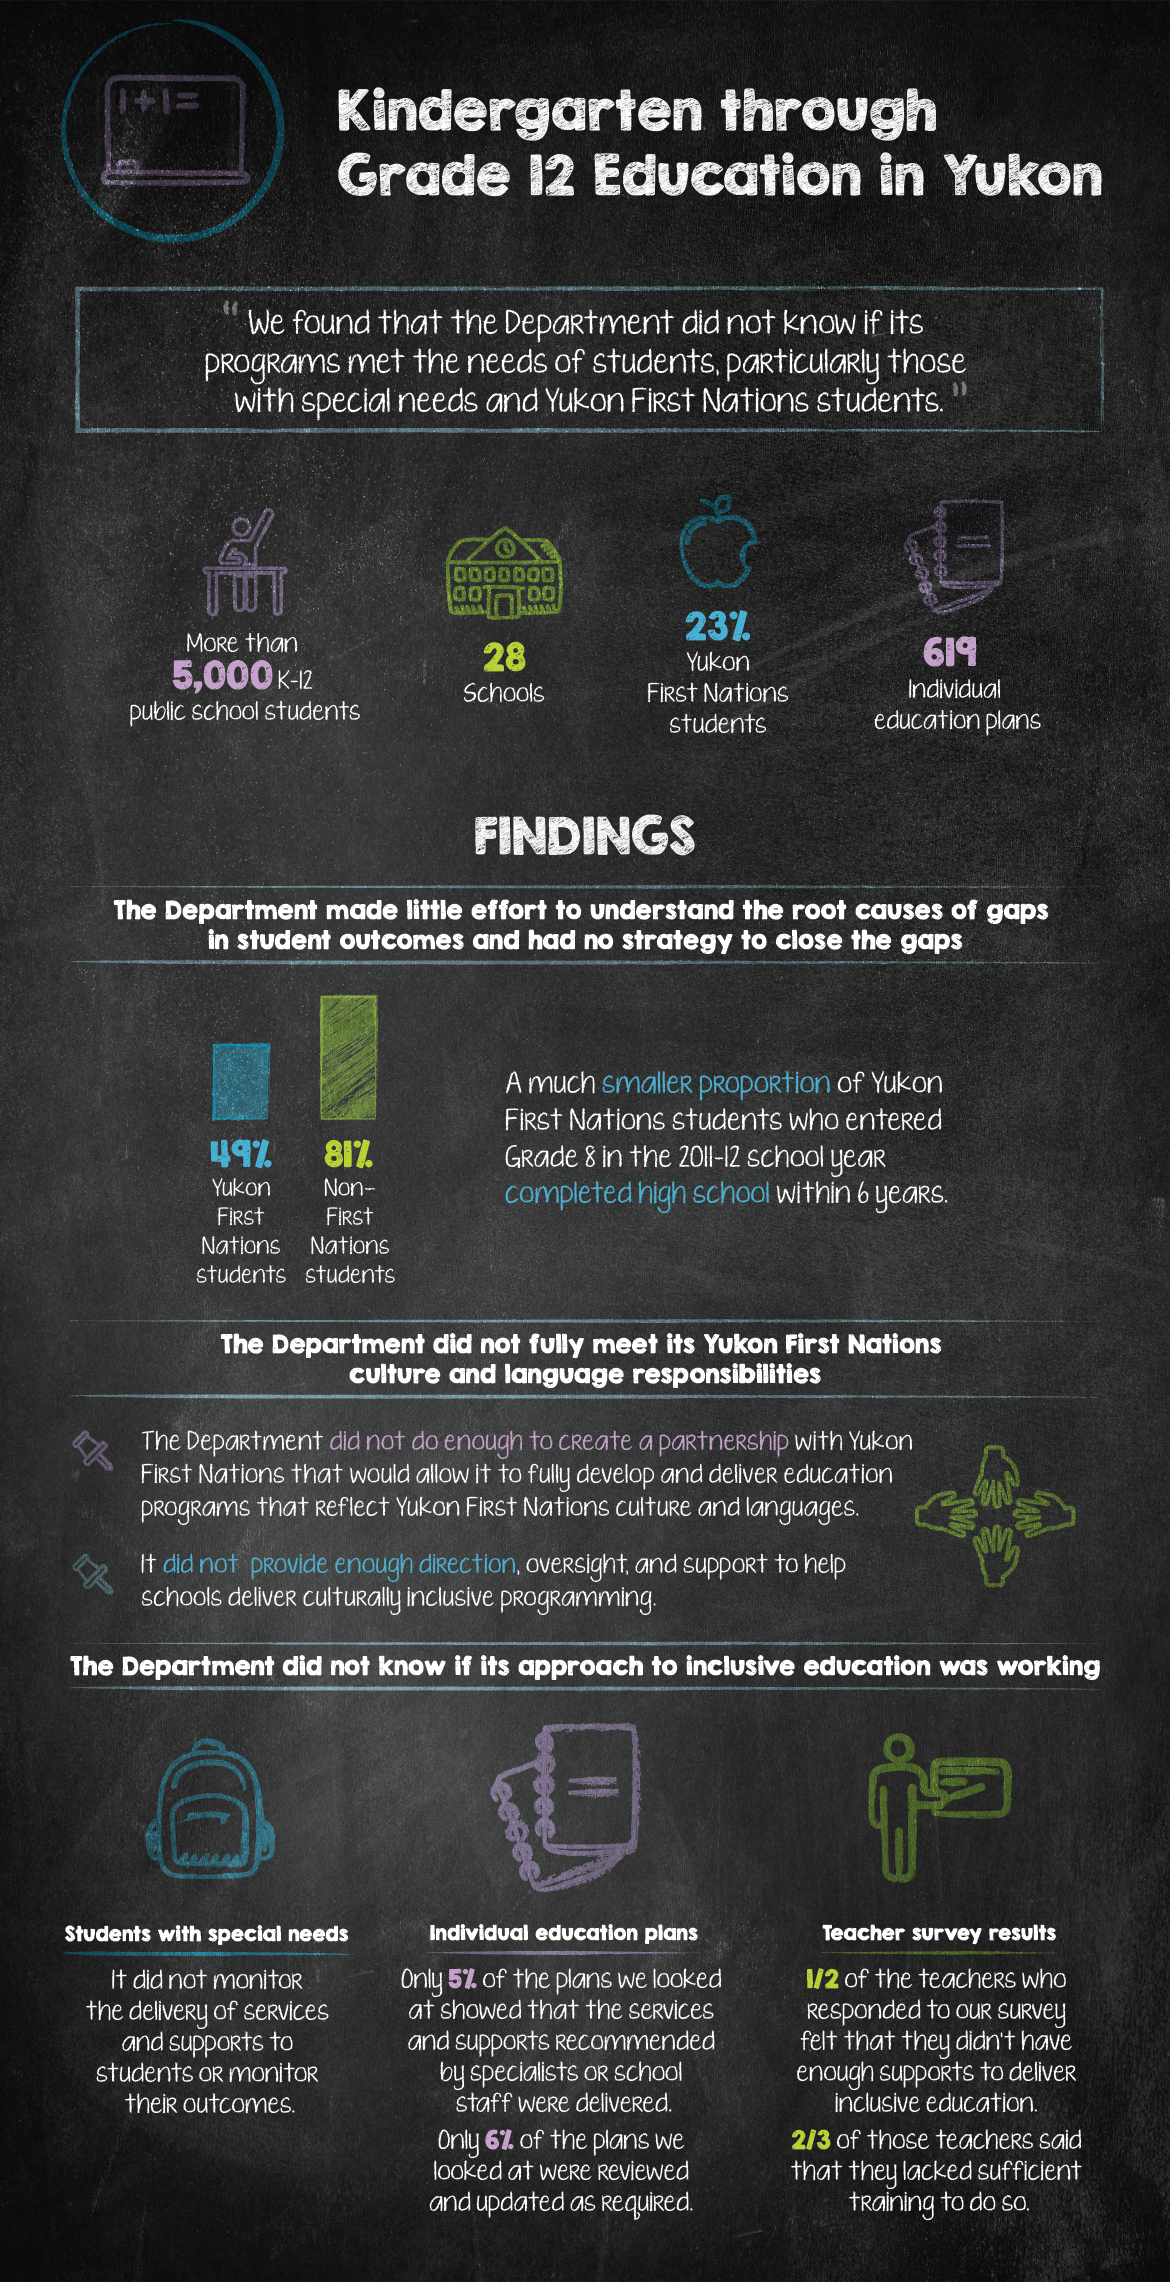 This infographic presents findings from the audit of kindergarten through Grade 12 education in Yukon